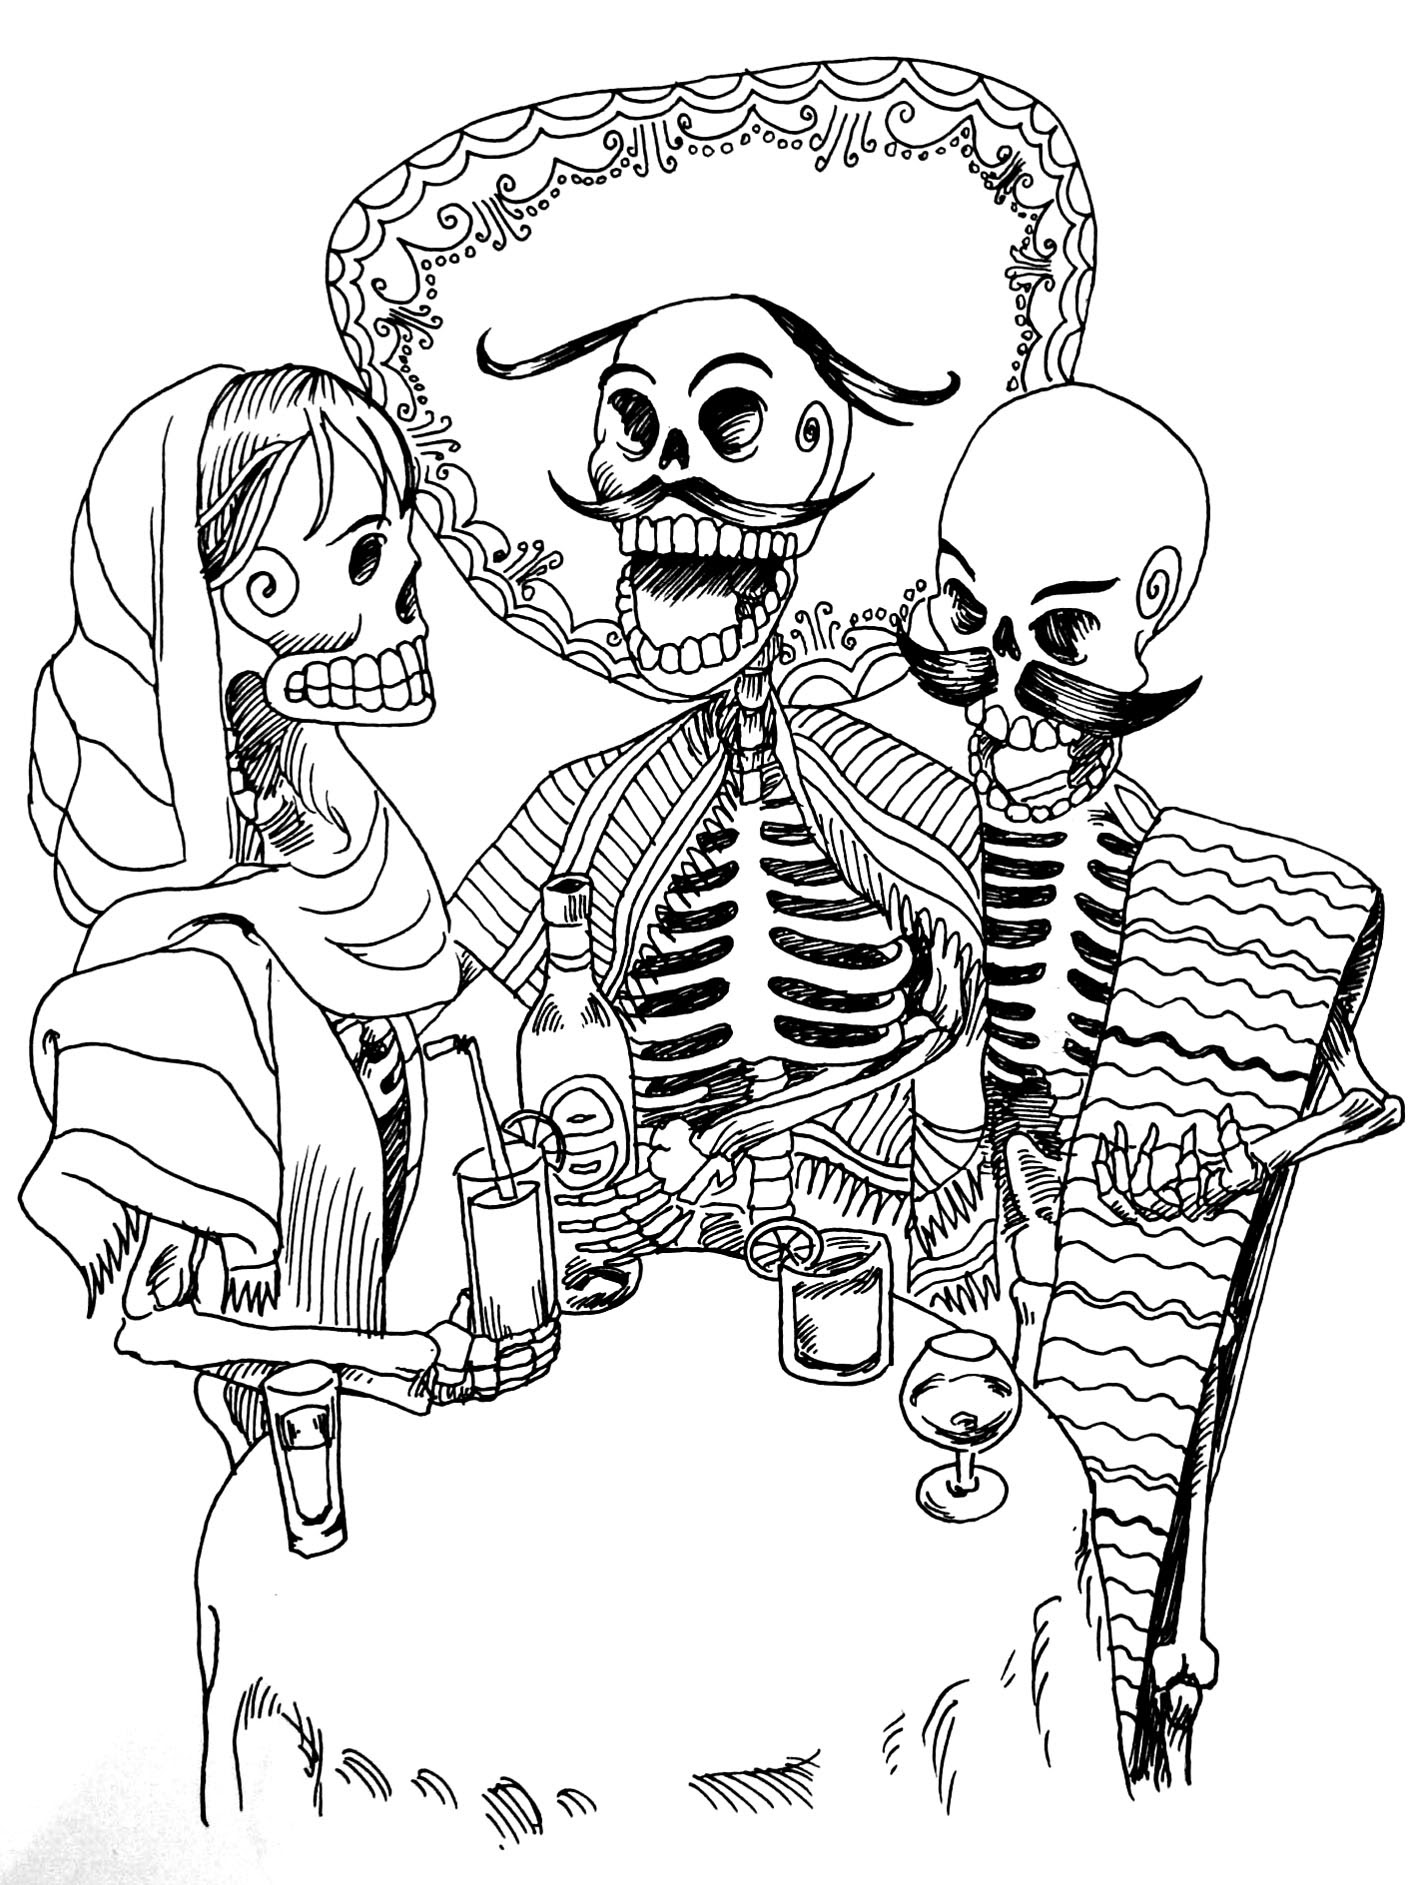 Tattoos - Coloring pages for adults : coloring-tatouage-skeletons